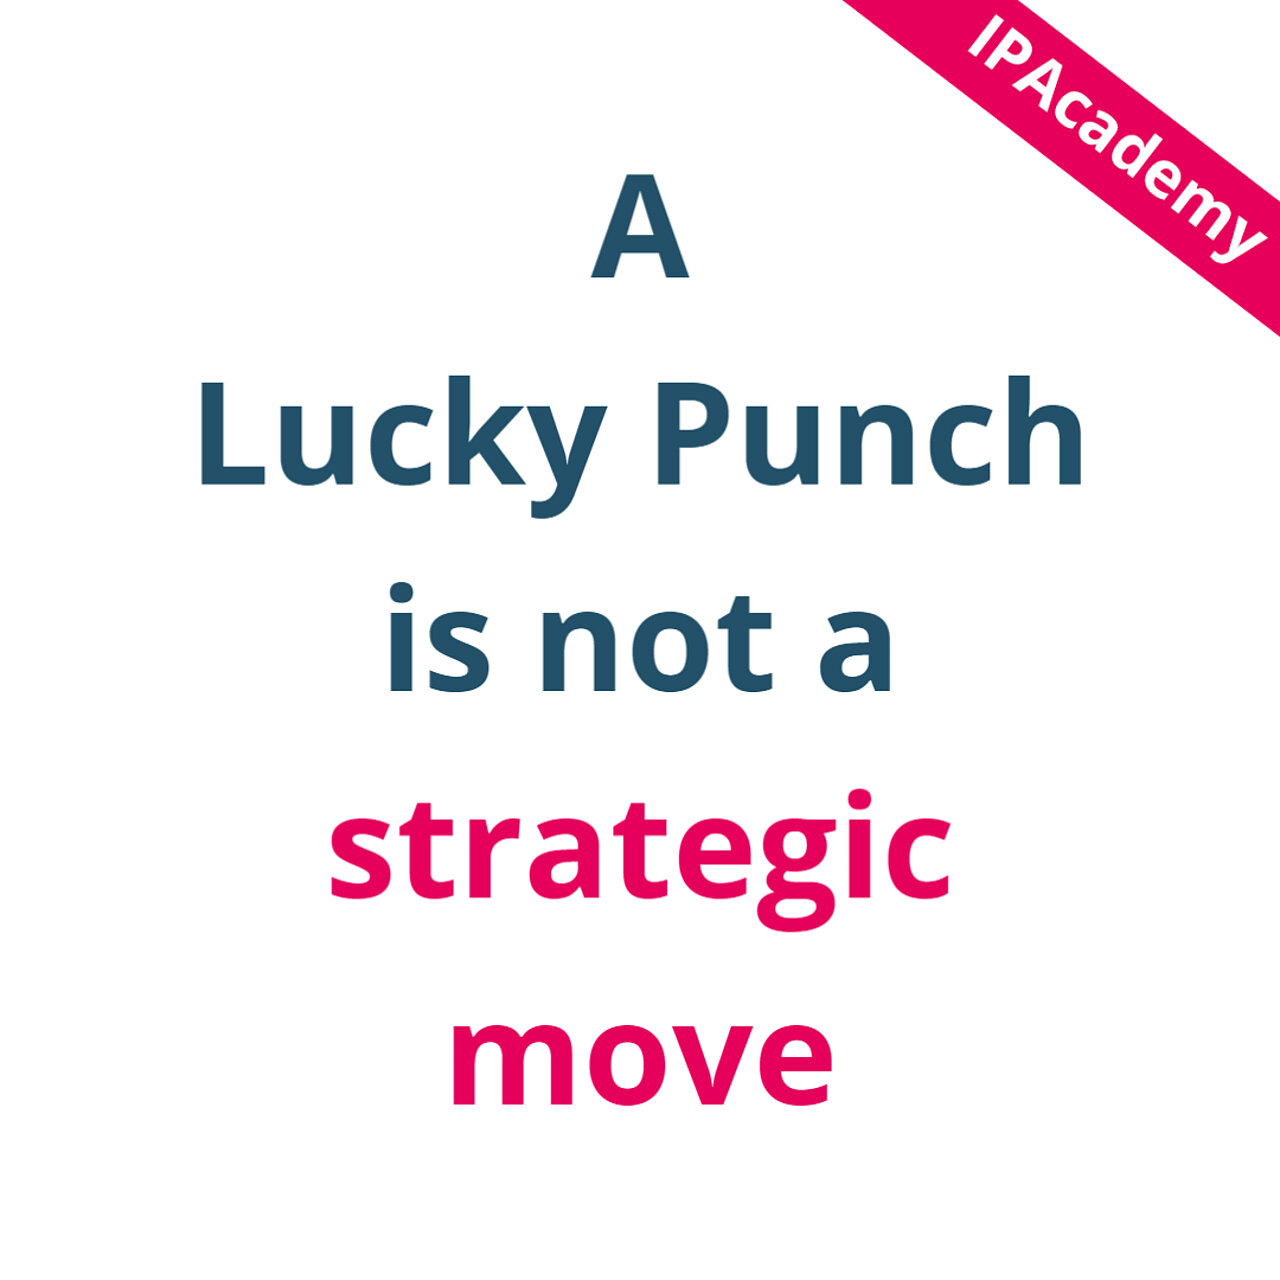 A lucky Punch is not a strategic move